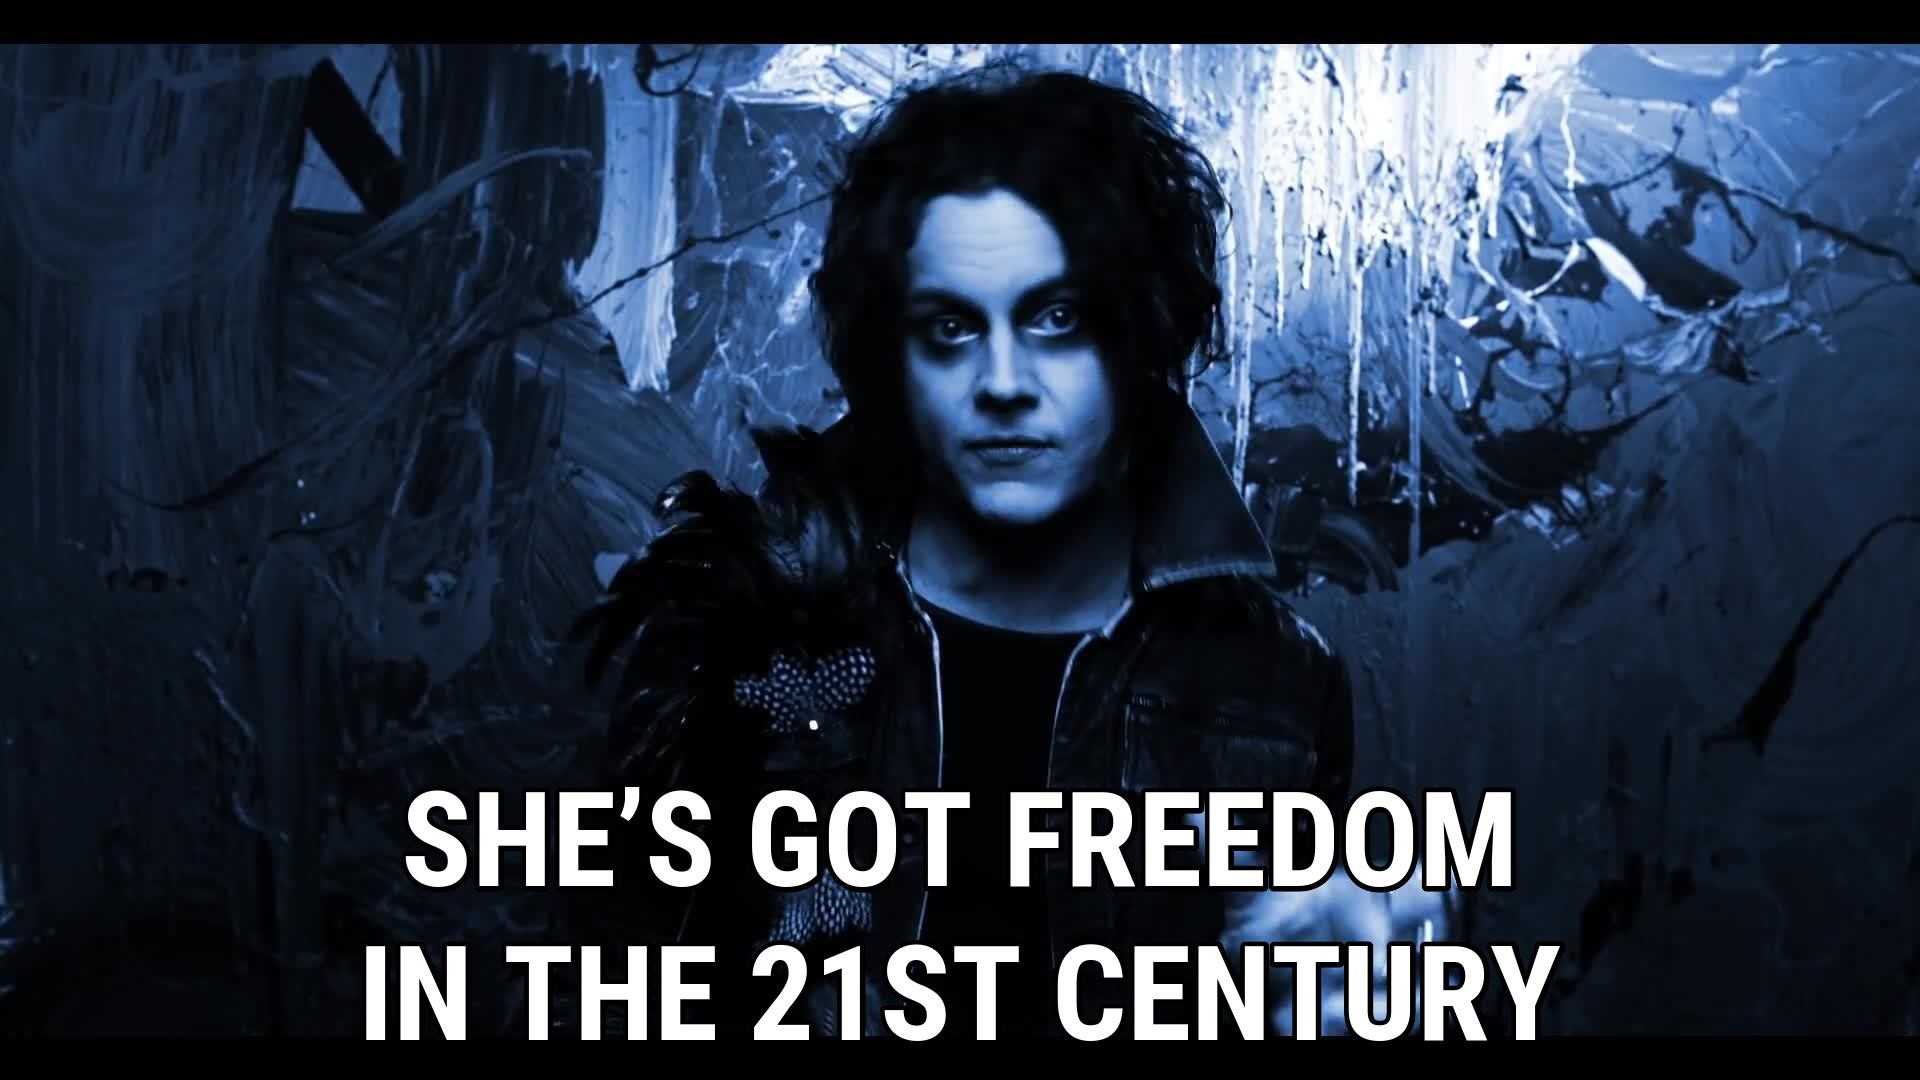 1920x1080 She's got freedom in the 21st century